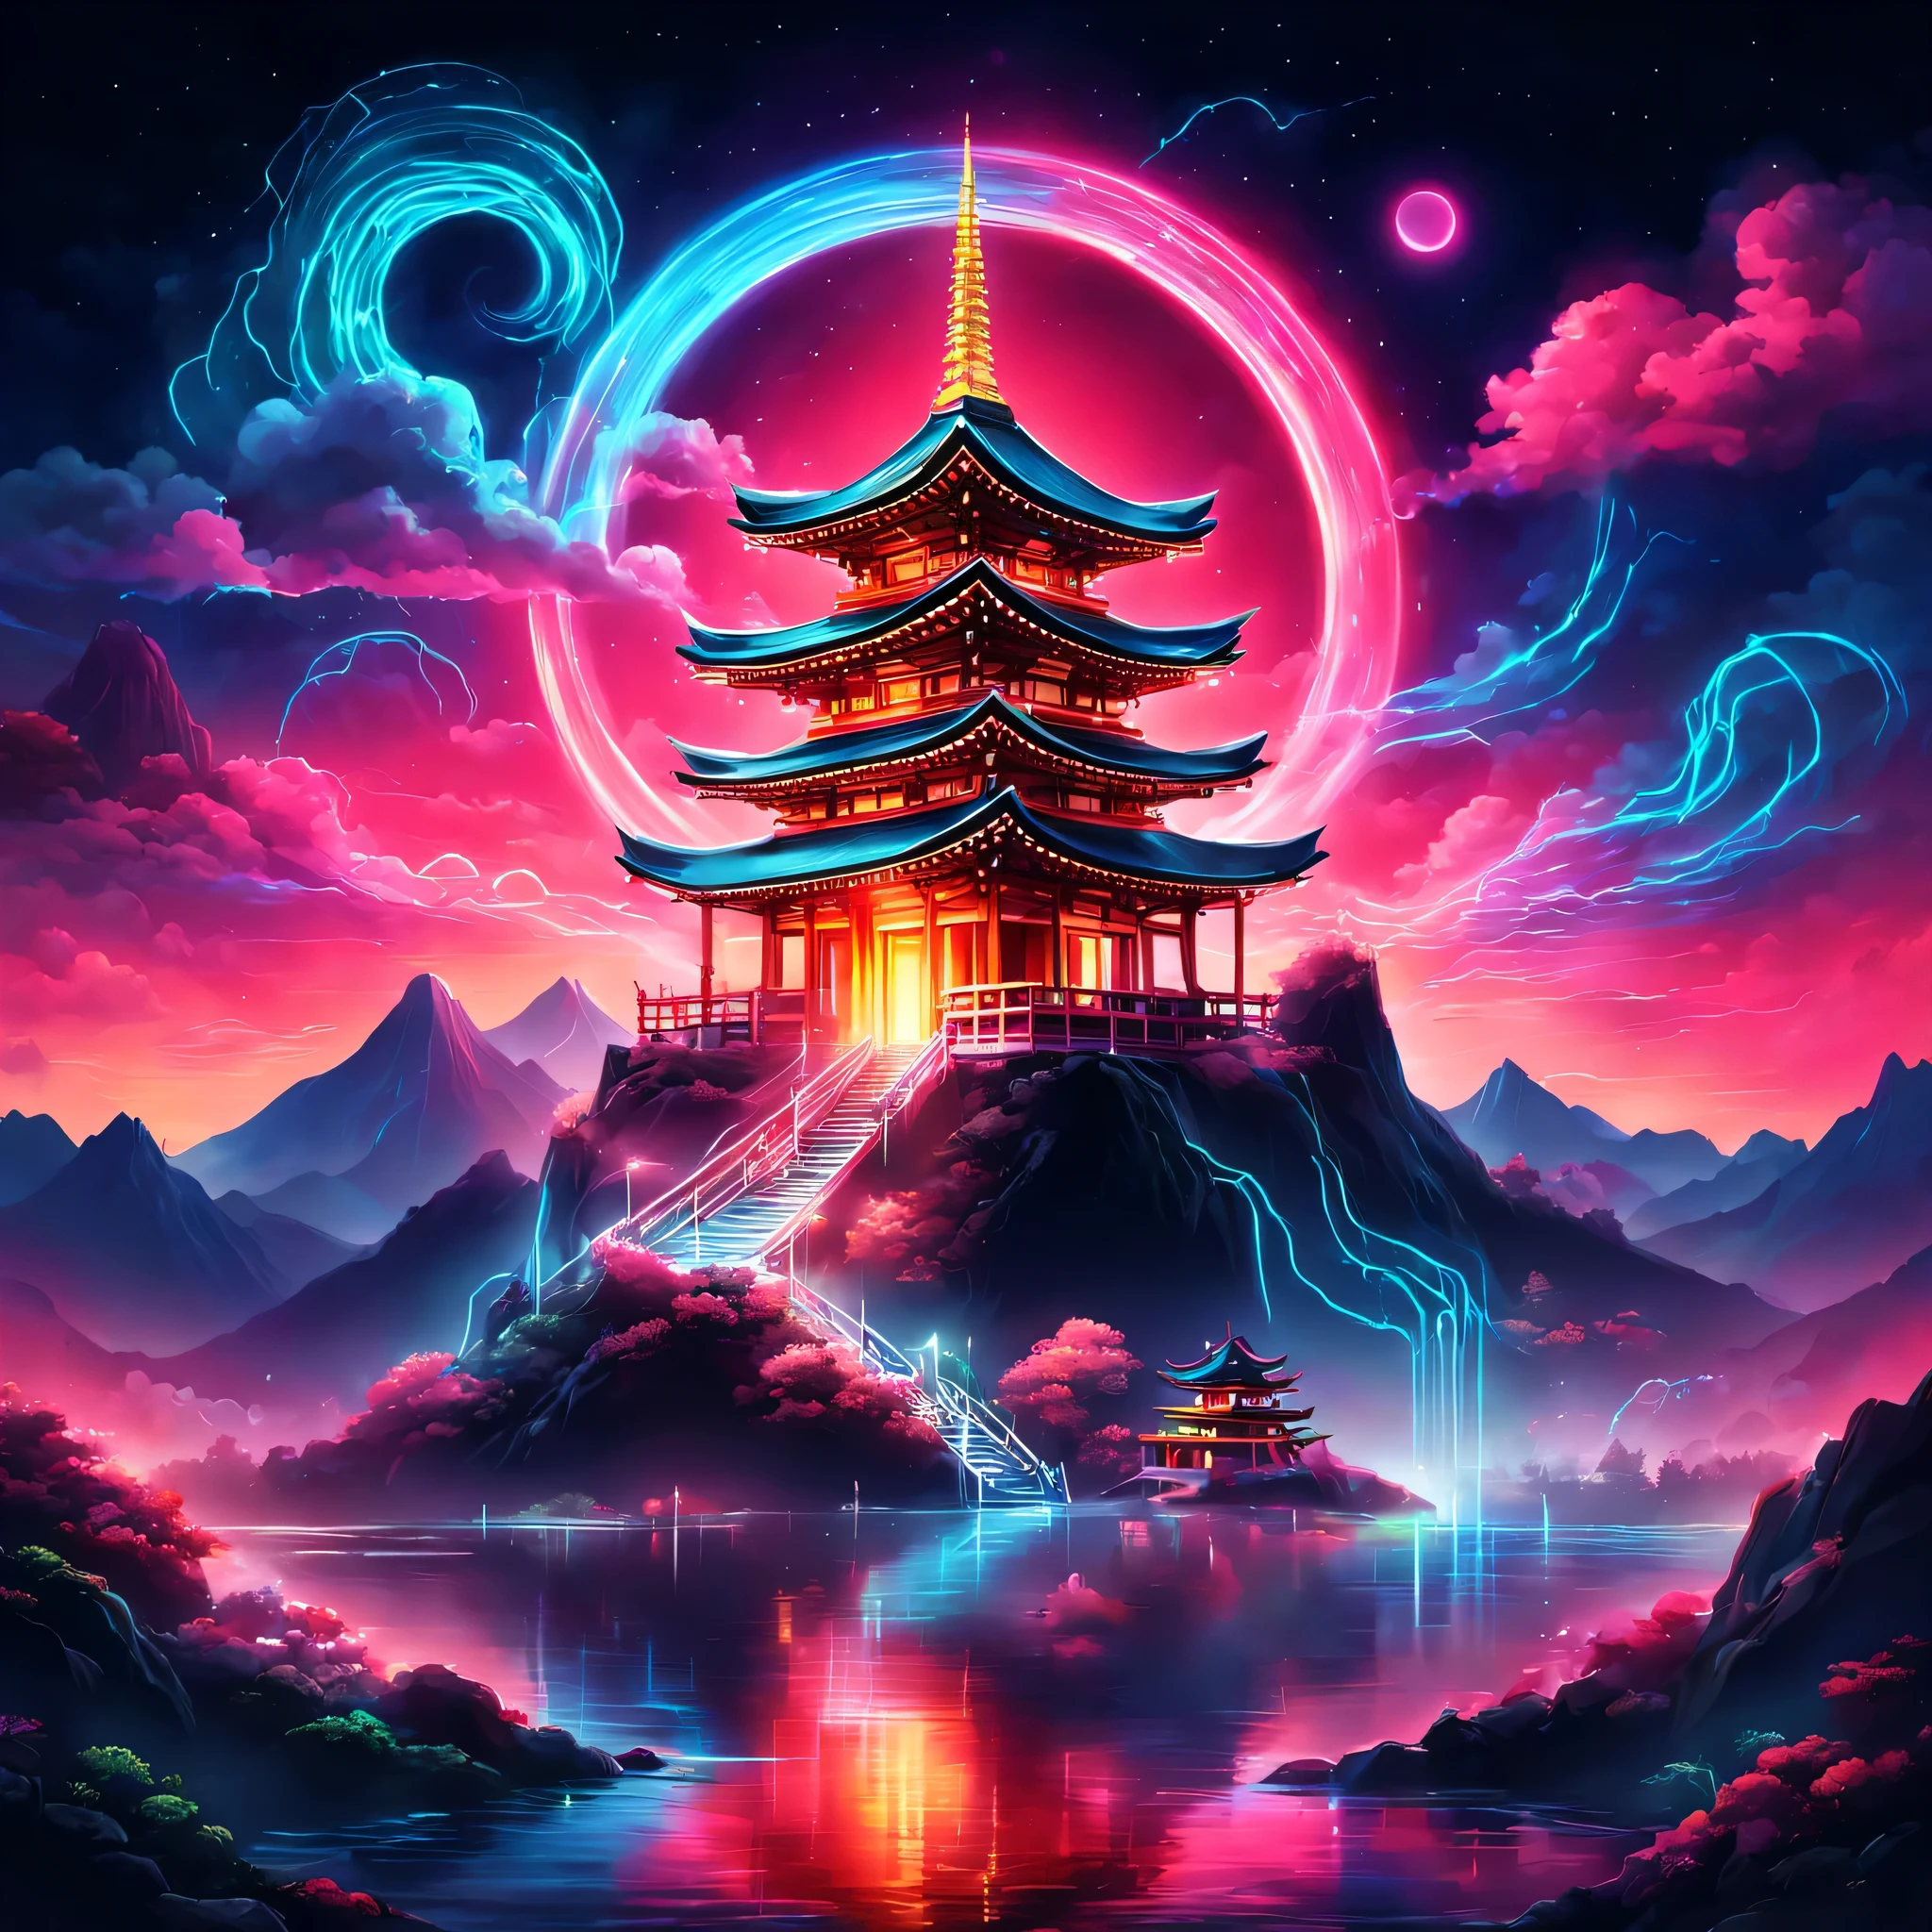 The aesthetics of Vaporwave,Landscape painting,Japan colored in neon colors,Fuji Mountain,shrine,cloud,aurora,beautiful,rich colors,flash,とてもflash,Cast colorful spells,Draw in neon colors on a dark background,Fusion of good old Japanese scenery and modern art,Pop Illustration,poster,perfect composition,Design that expresses Japan,works of art,Bright colors、black,pink,Light blue,purple